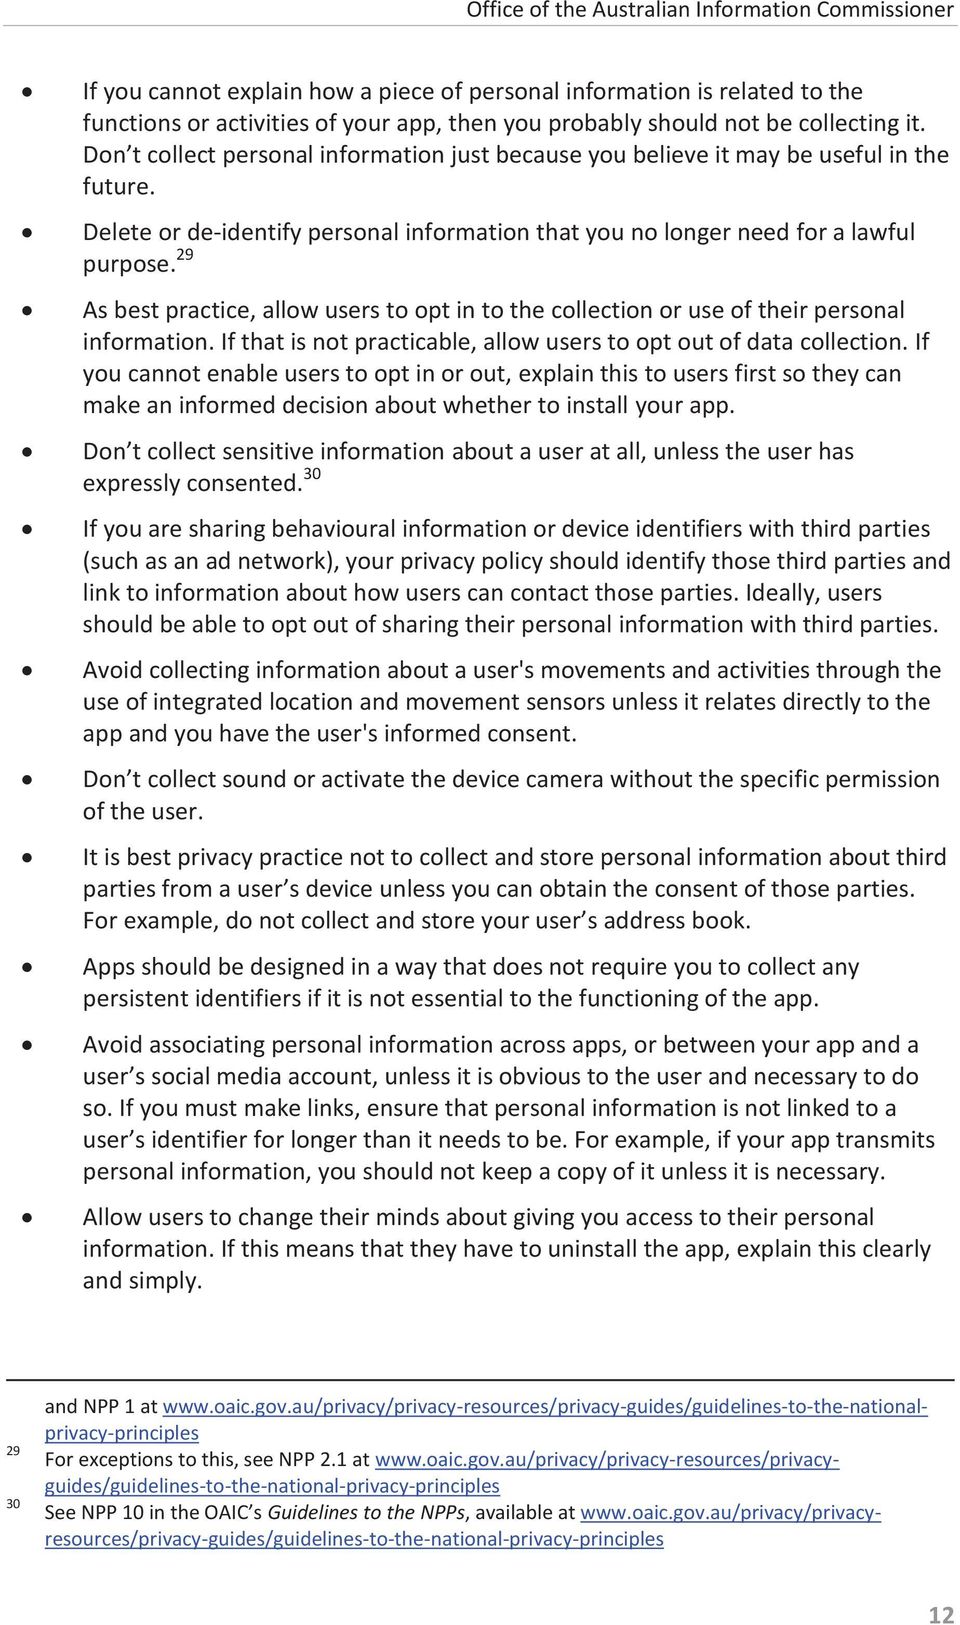 29 As best practice, allow users to opt in to the collection or use of their personal information. If that is not practicable, allow users to opt out of data collection.